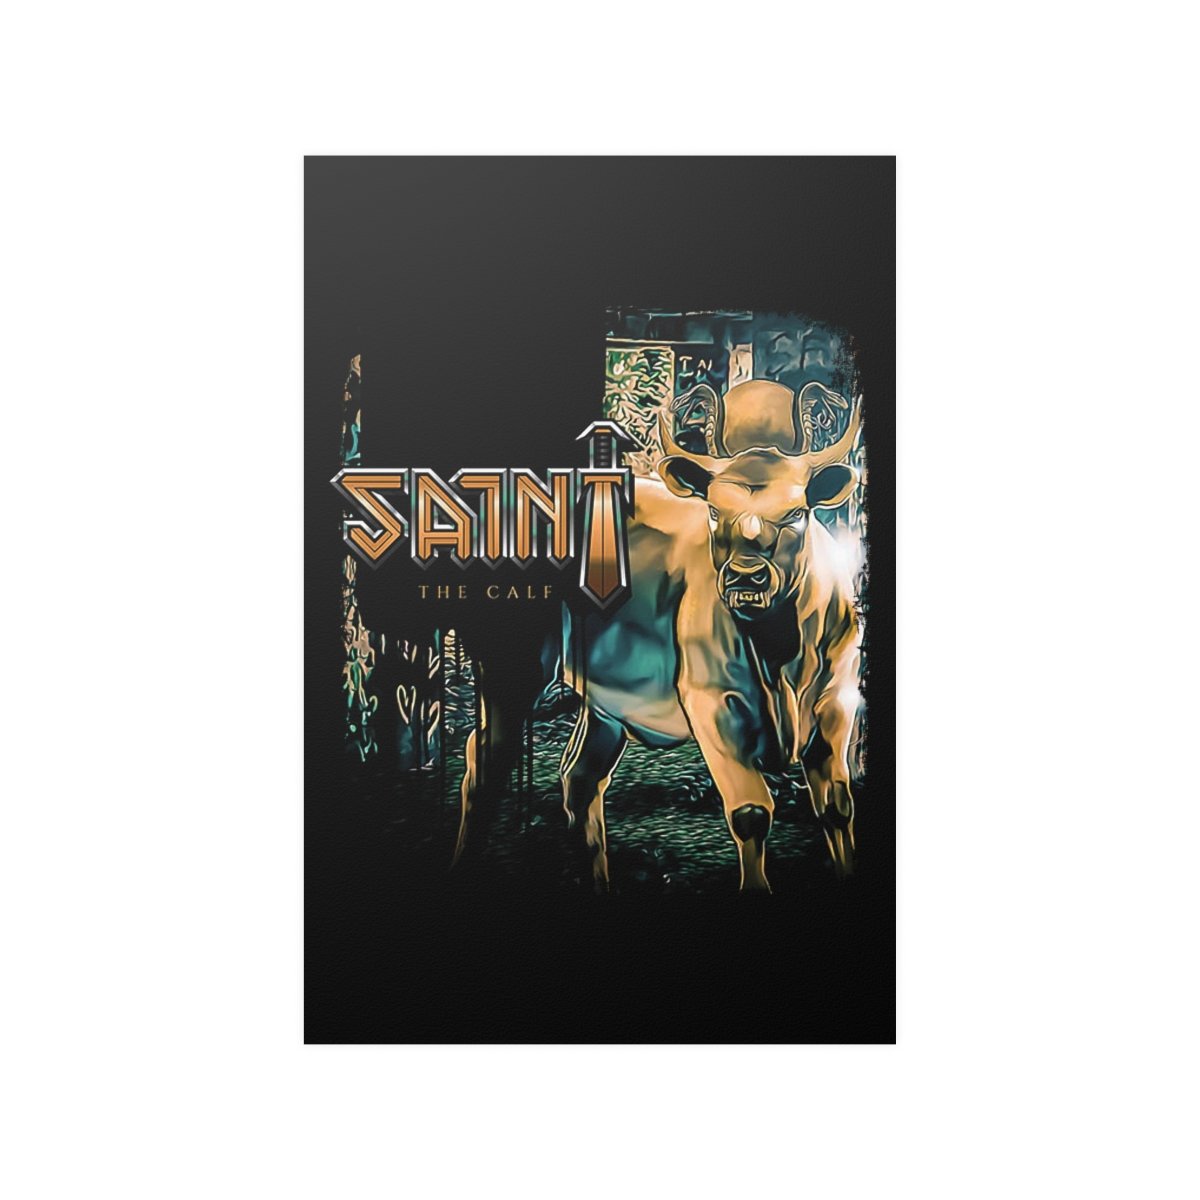 Saint – The Calf Posters